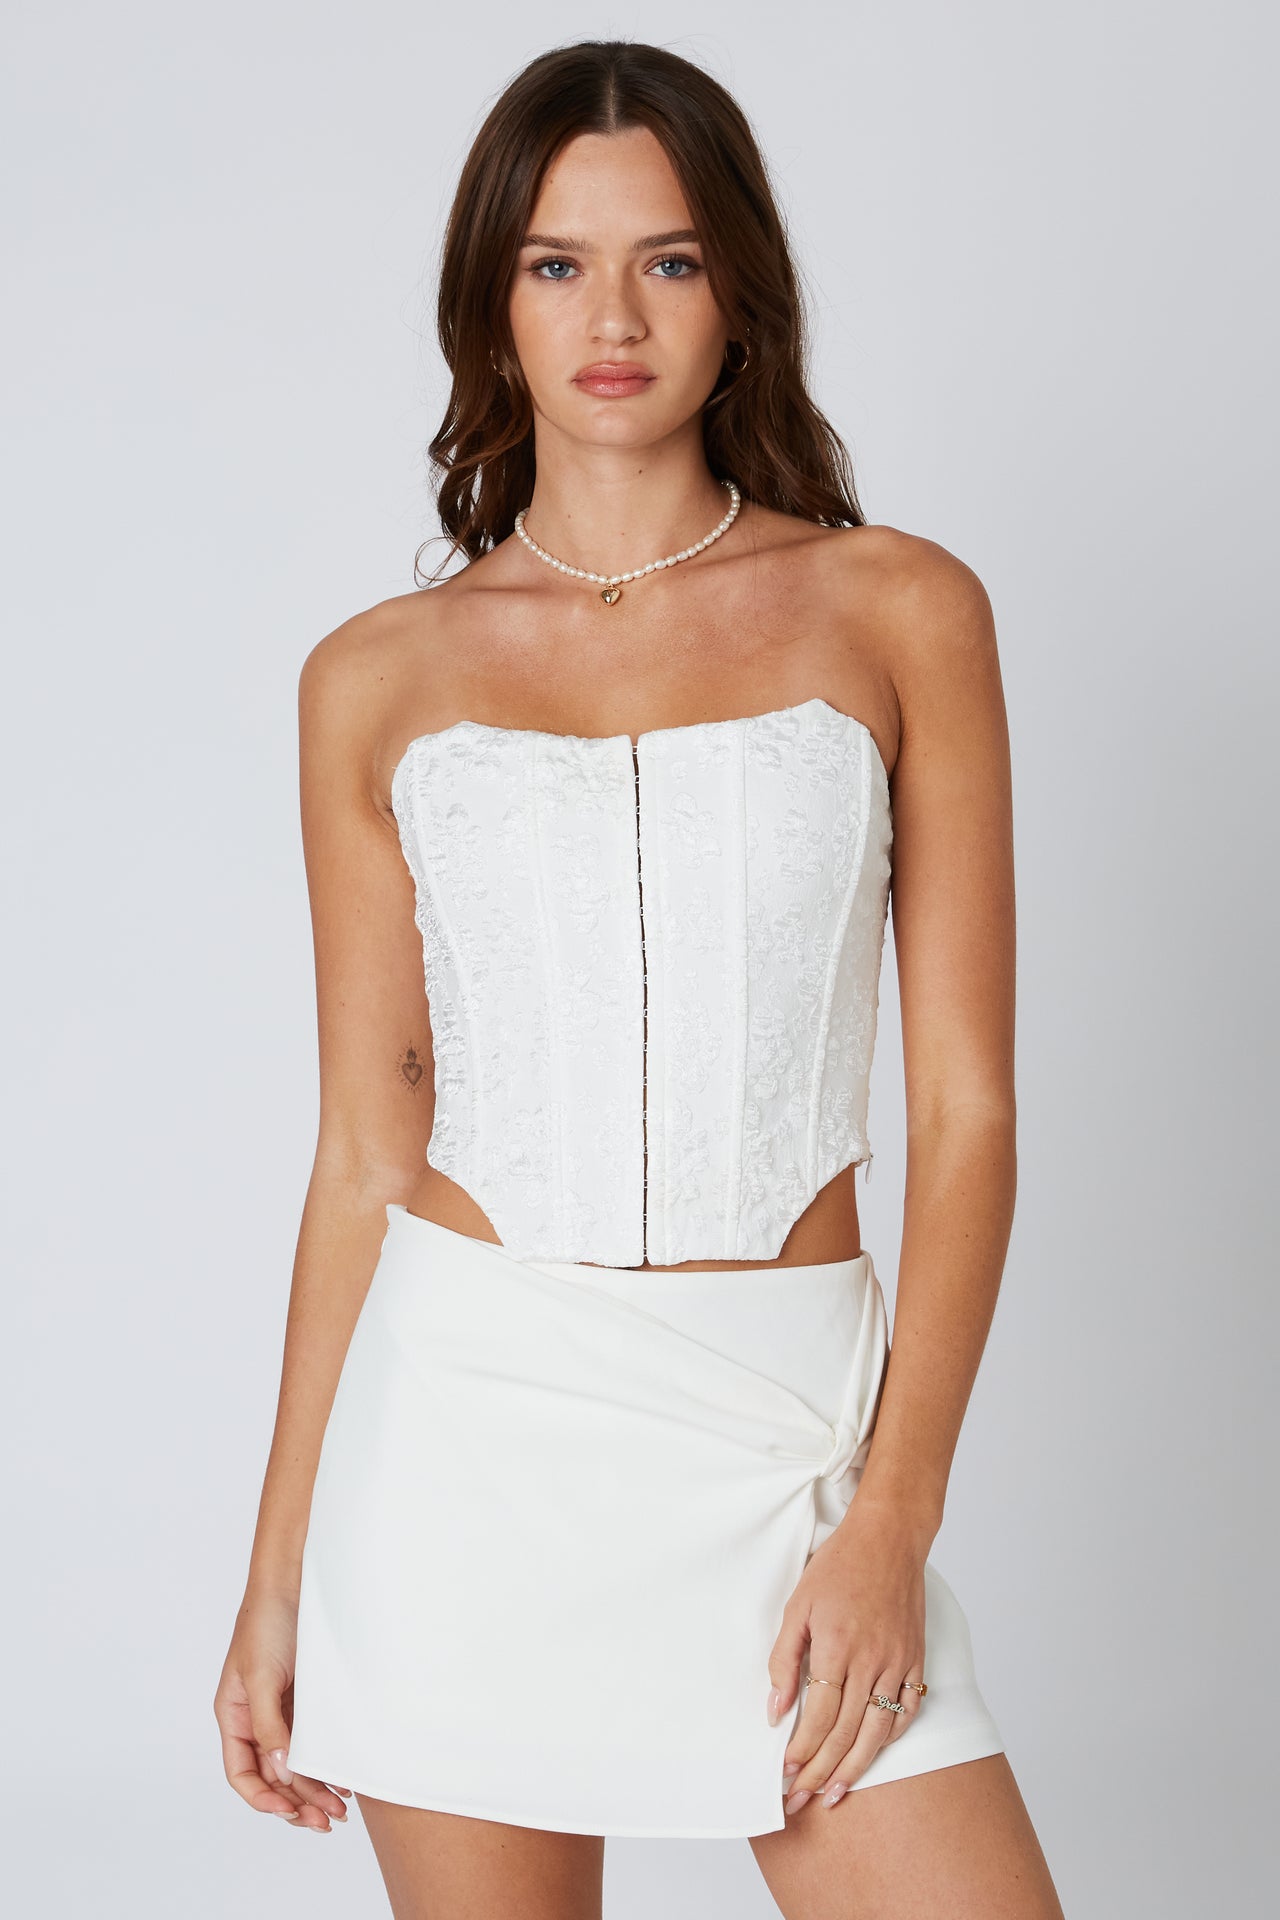 Stay With It Bustier White, Tank Blouse by Cotton Candy | LIT Boutique